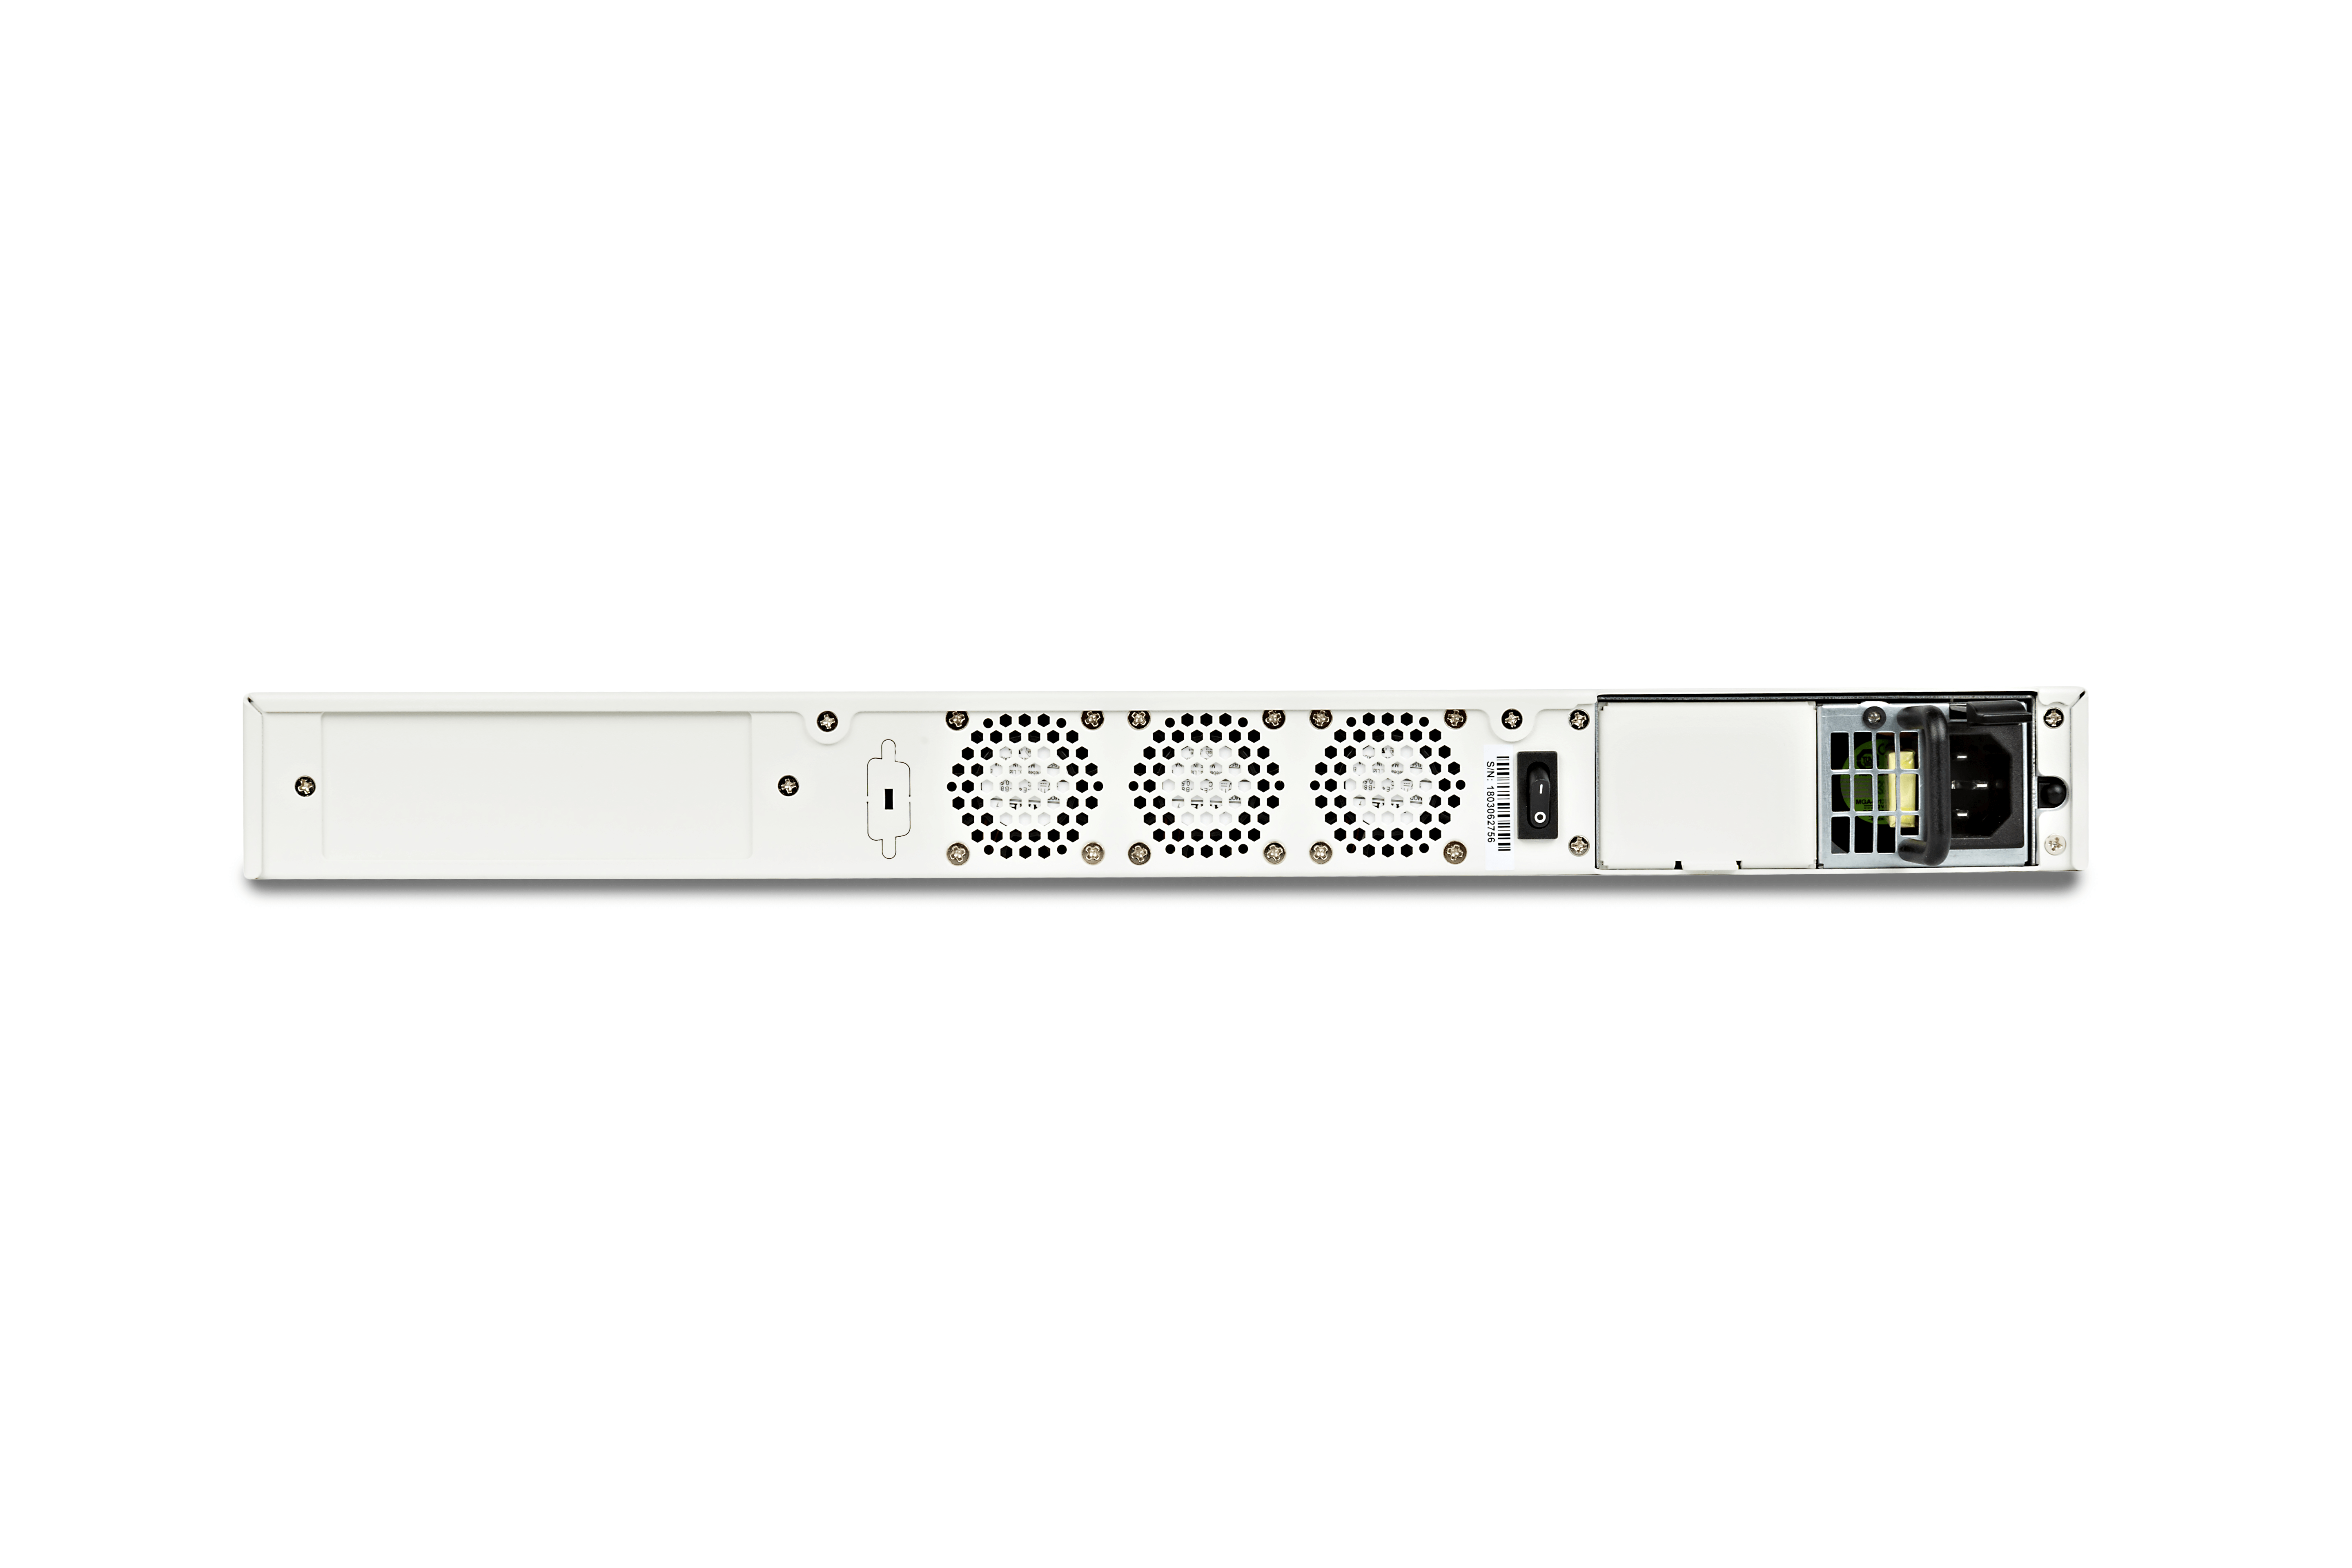 Fortinet FortiMail-400F